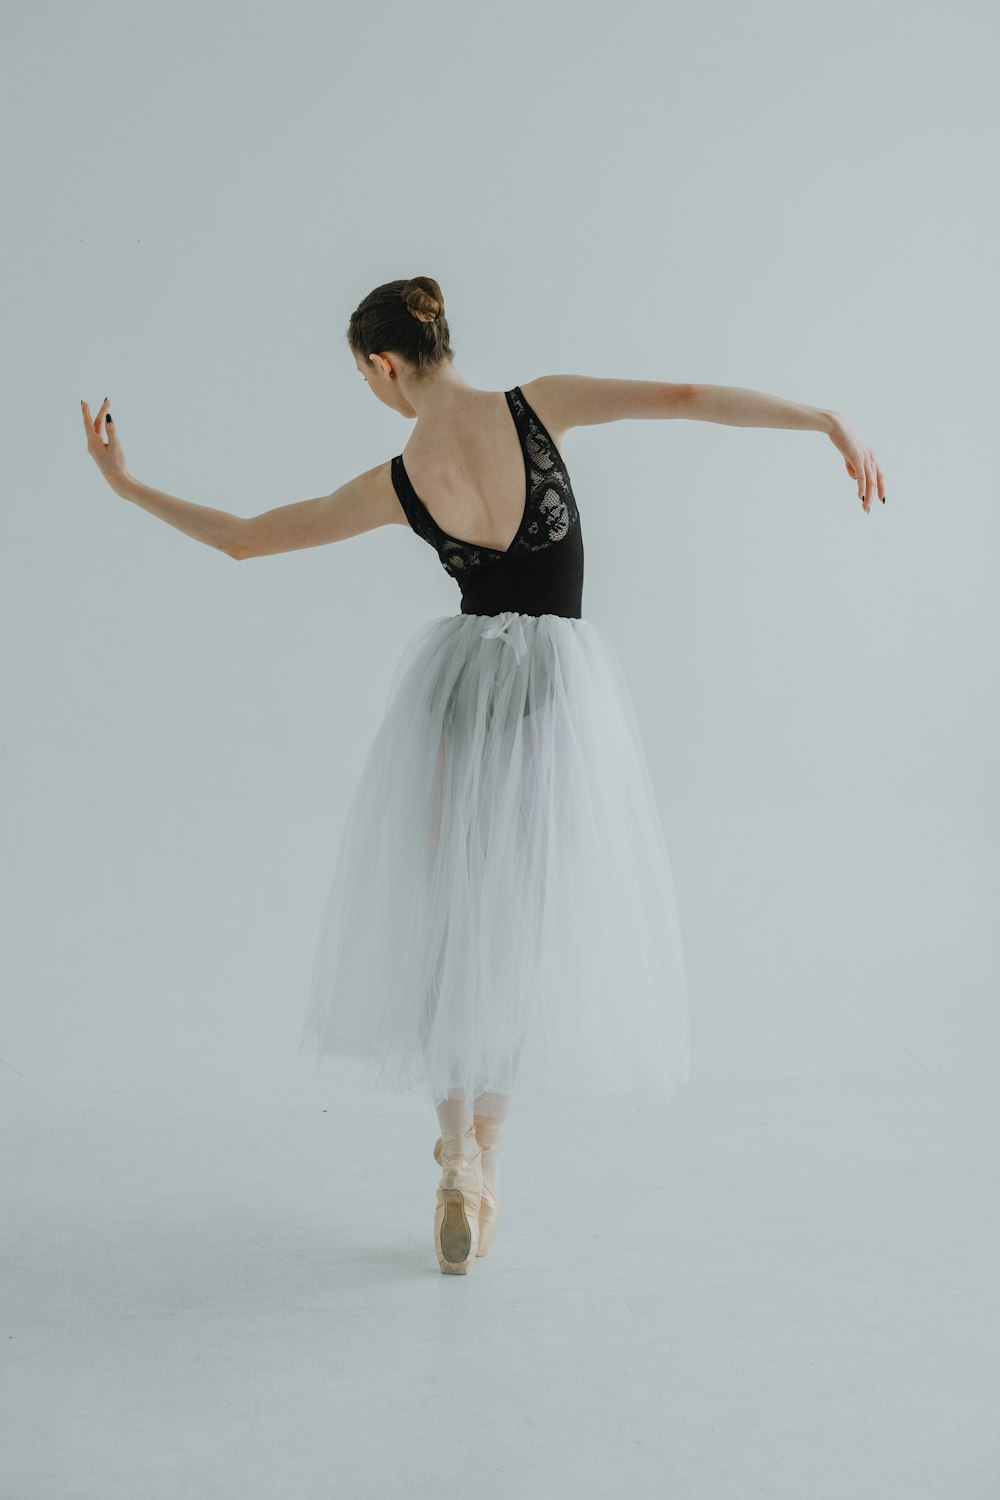 a woman in a tutu and ballet shoes